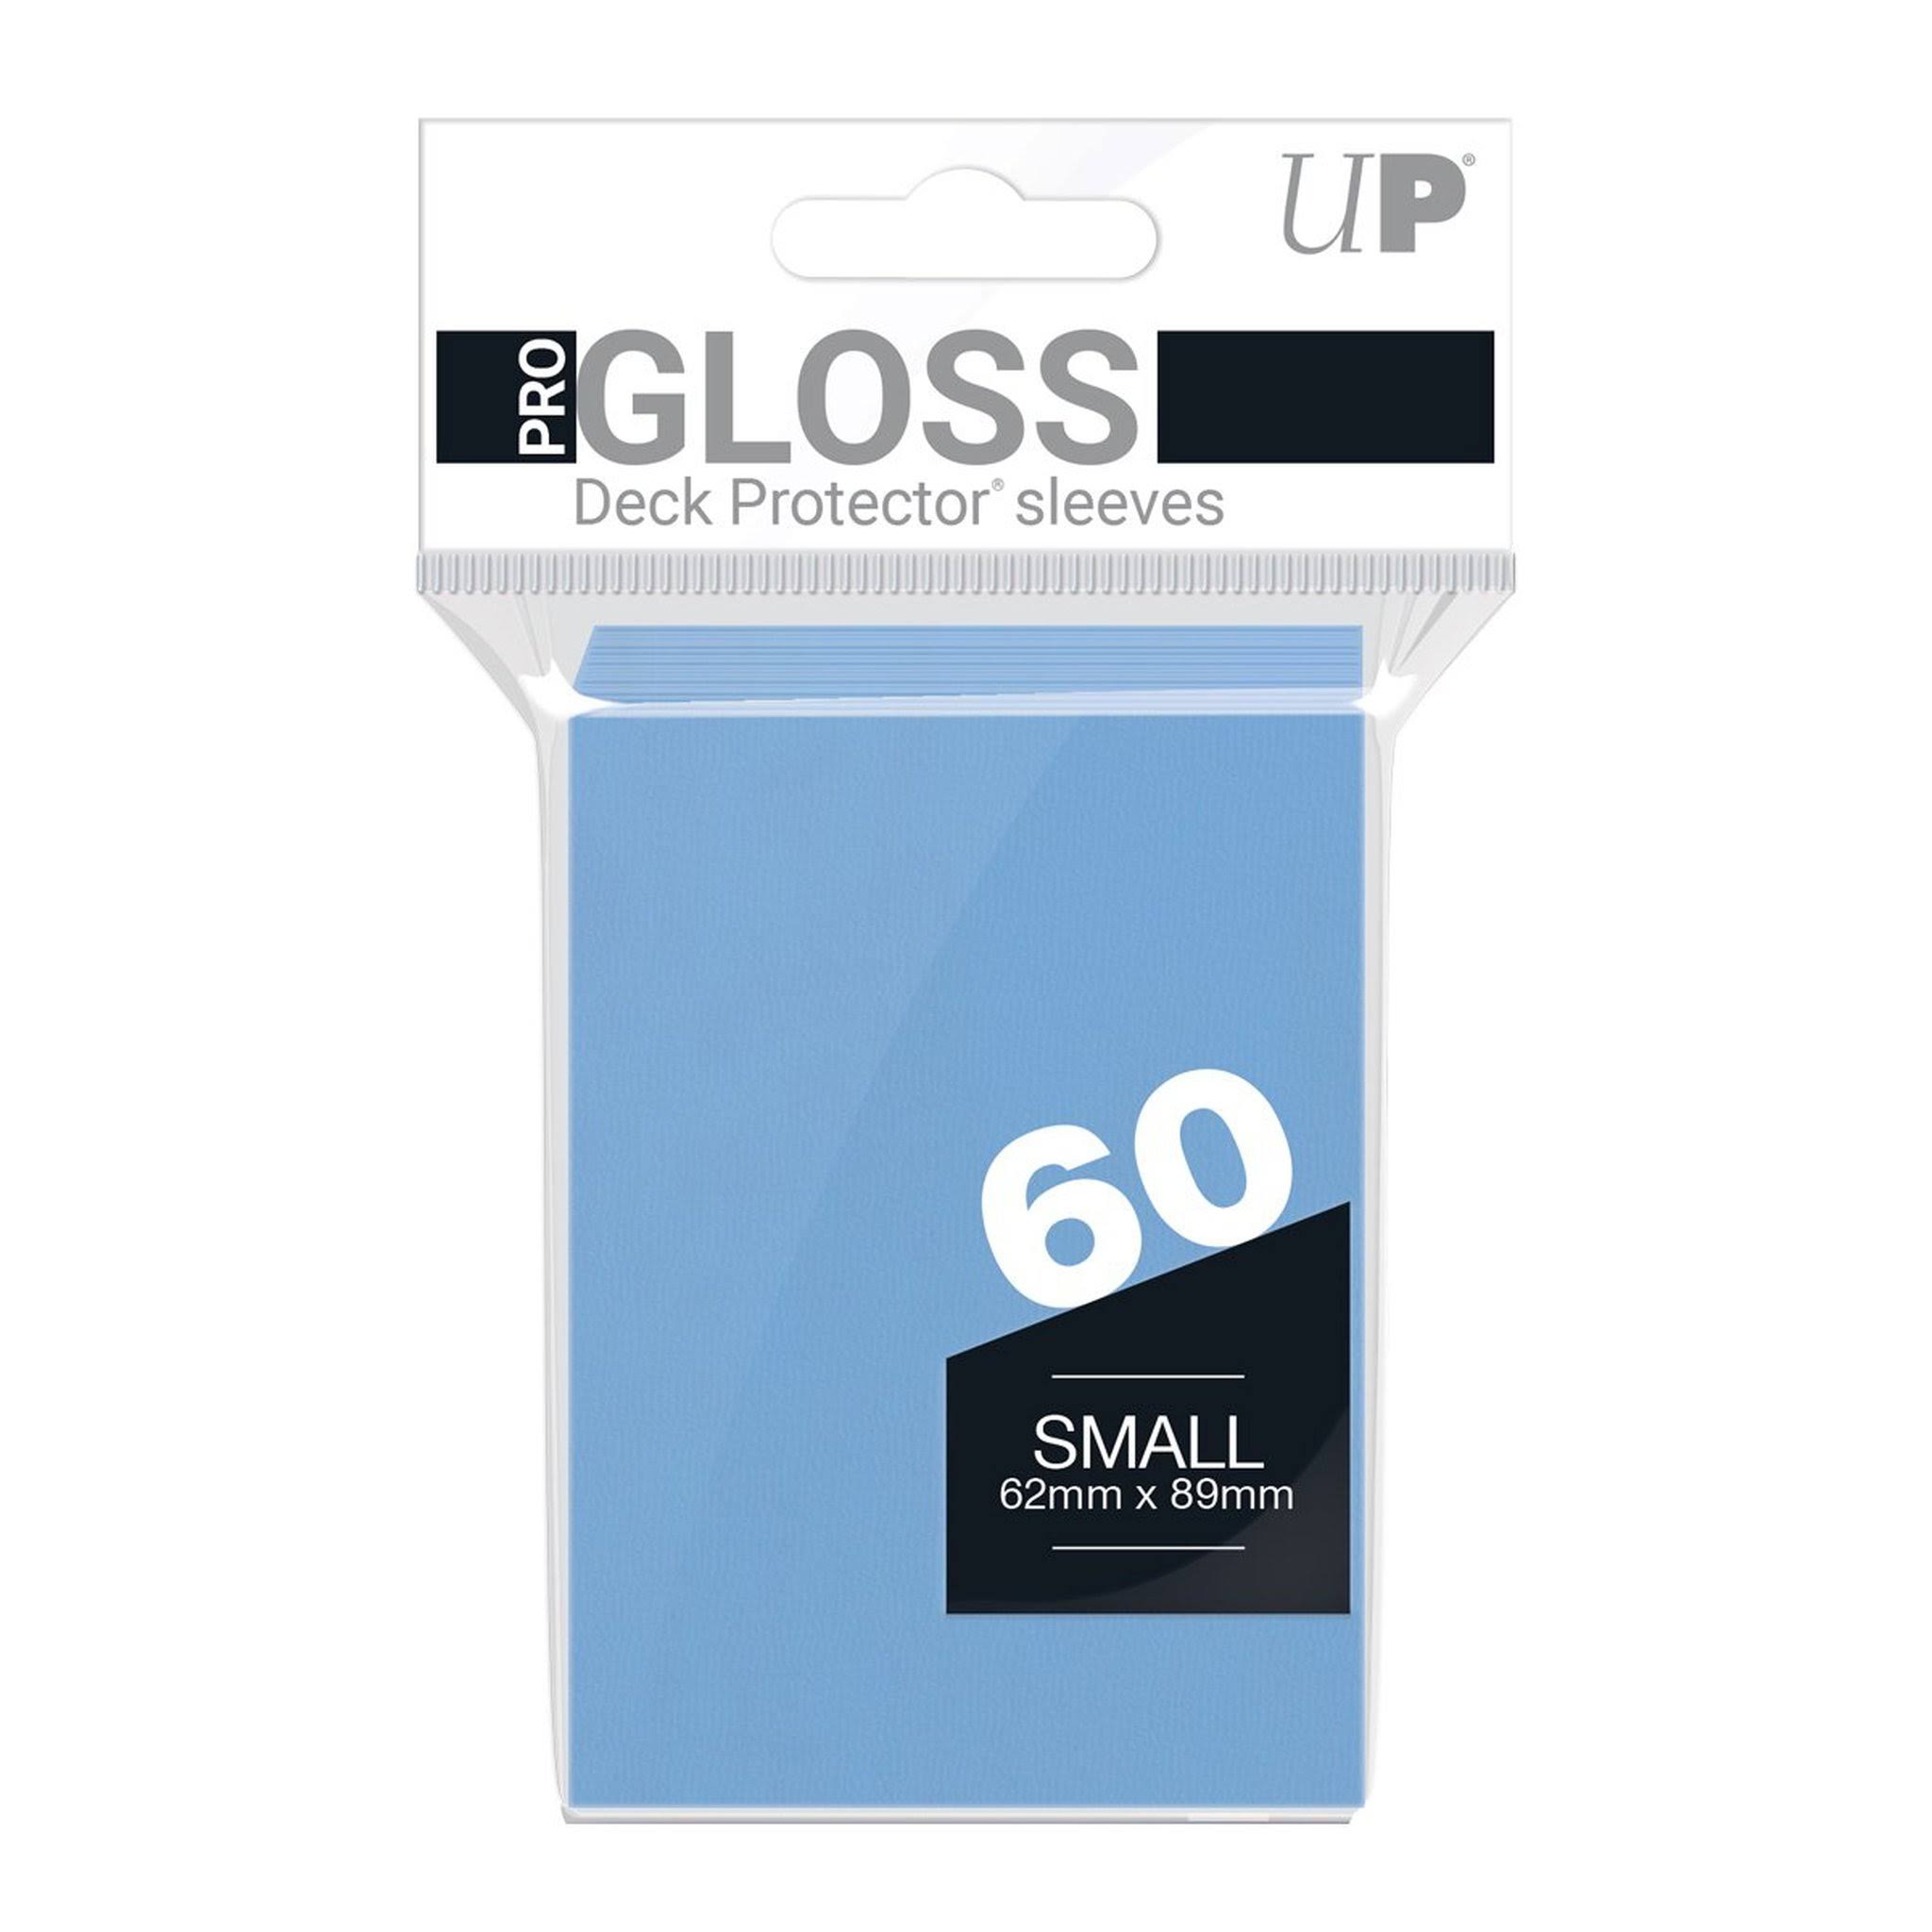 Ultra Pro Deck Protector Sleeves - Small, x60, Light Blue